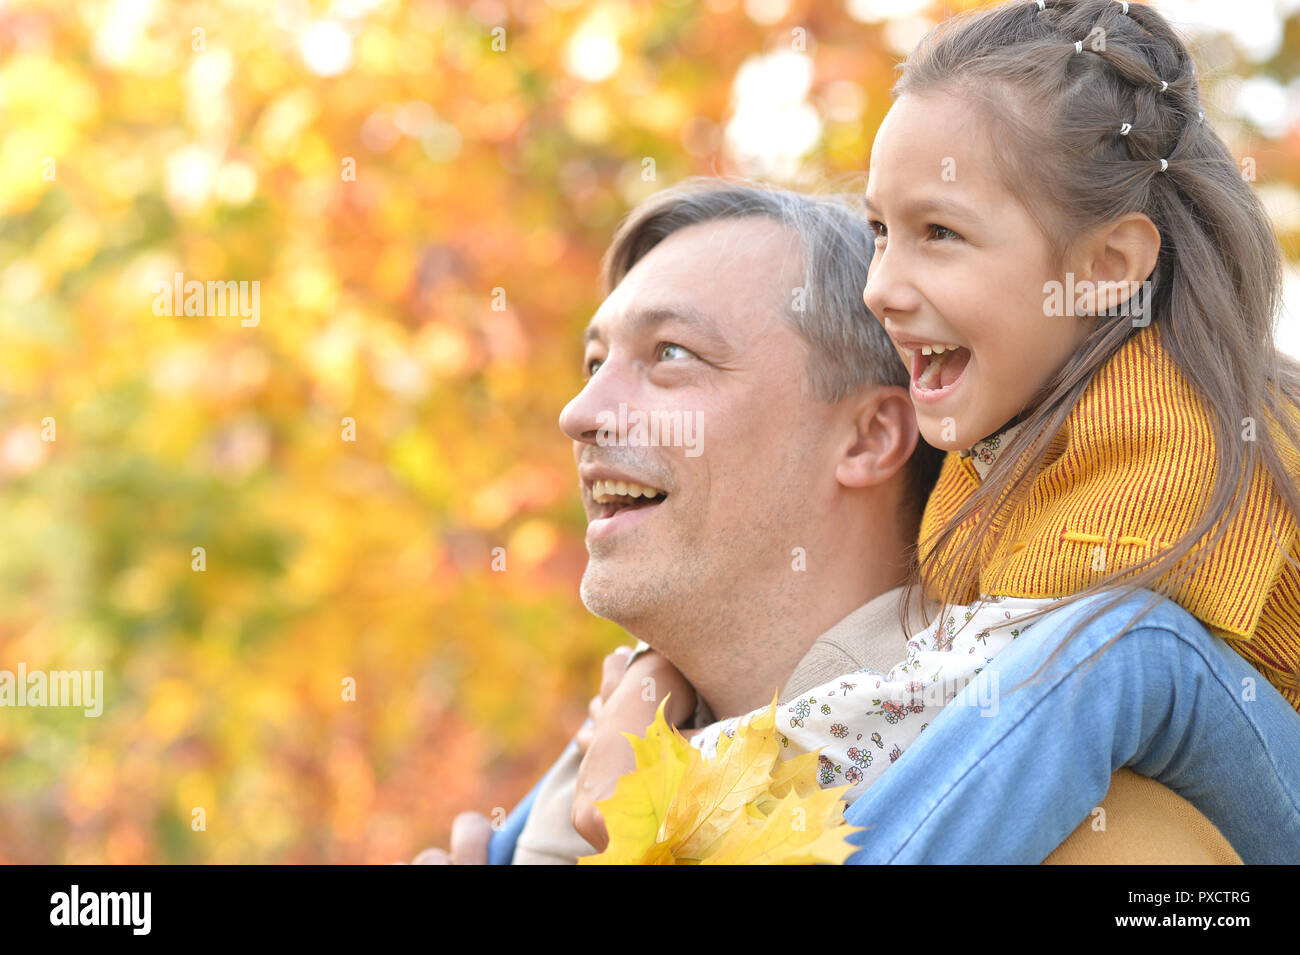 Portrait of father and daughter having fun in autumn park Stock Photo